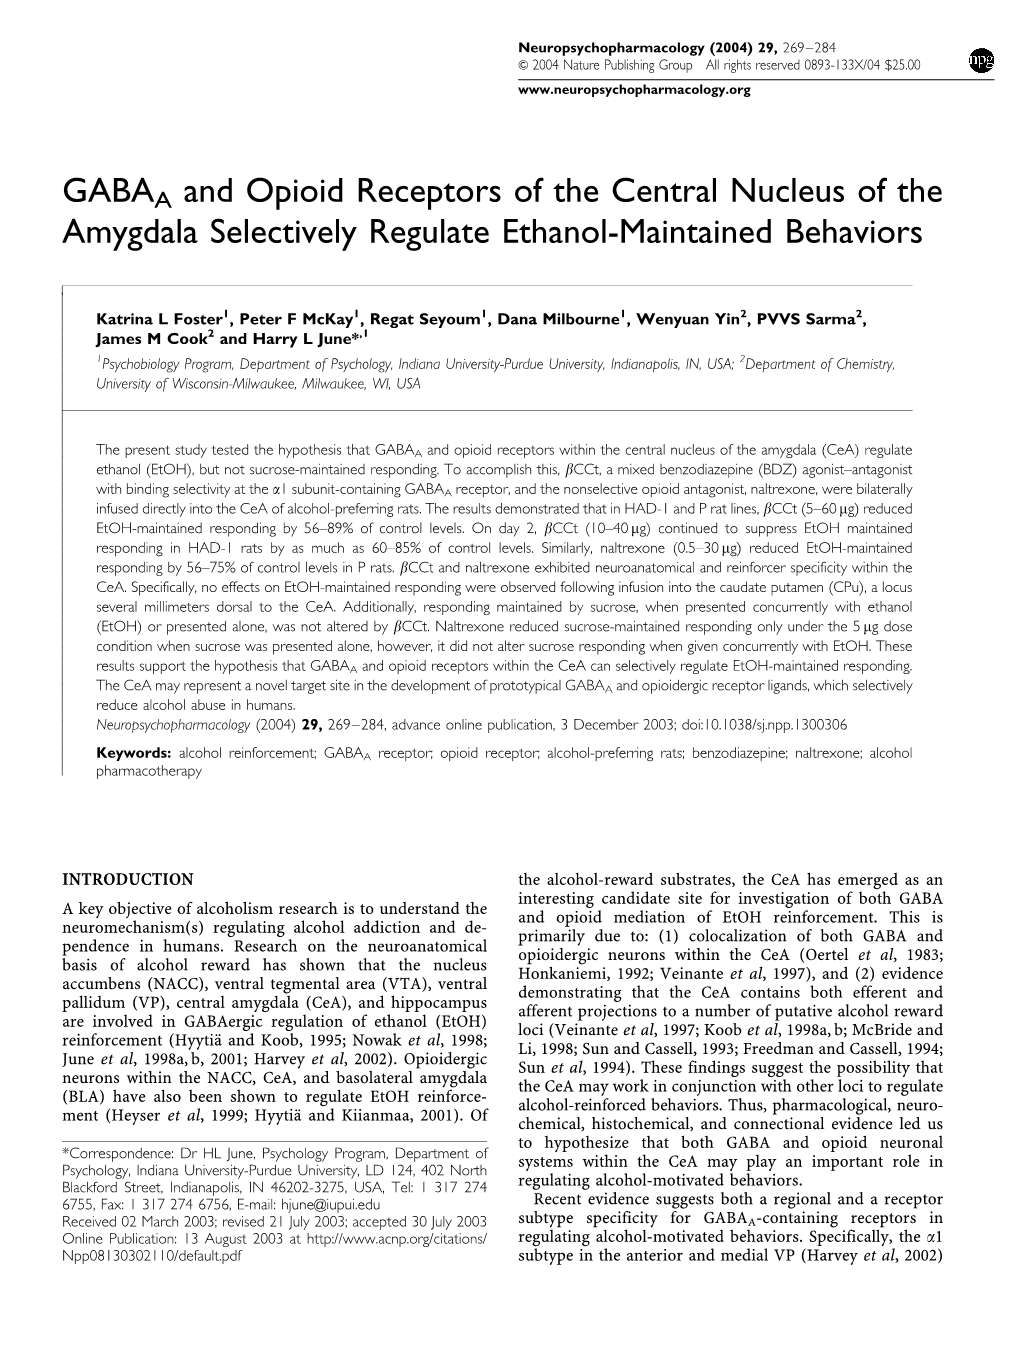 GABAA and Opioid Receptors of the Central Nucleus of the Amygdala Selectively Regulate Ethanol-Maintained Behaviors